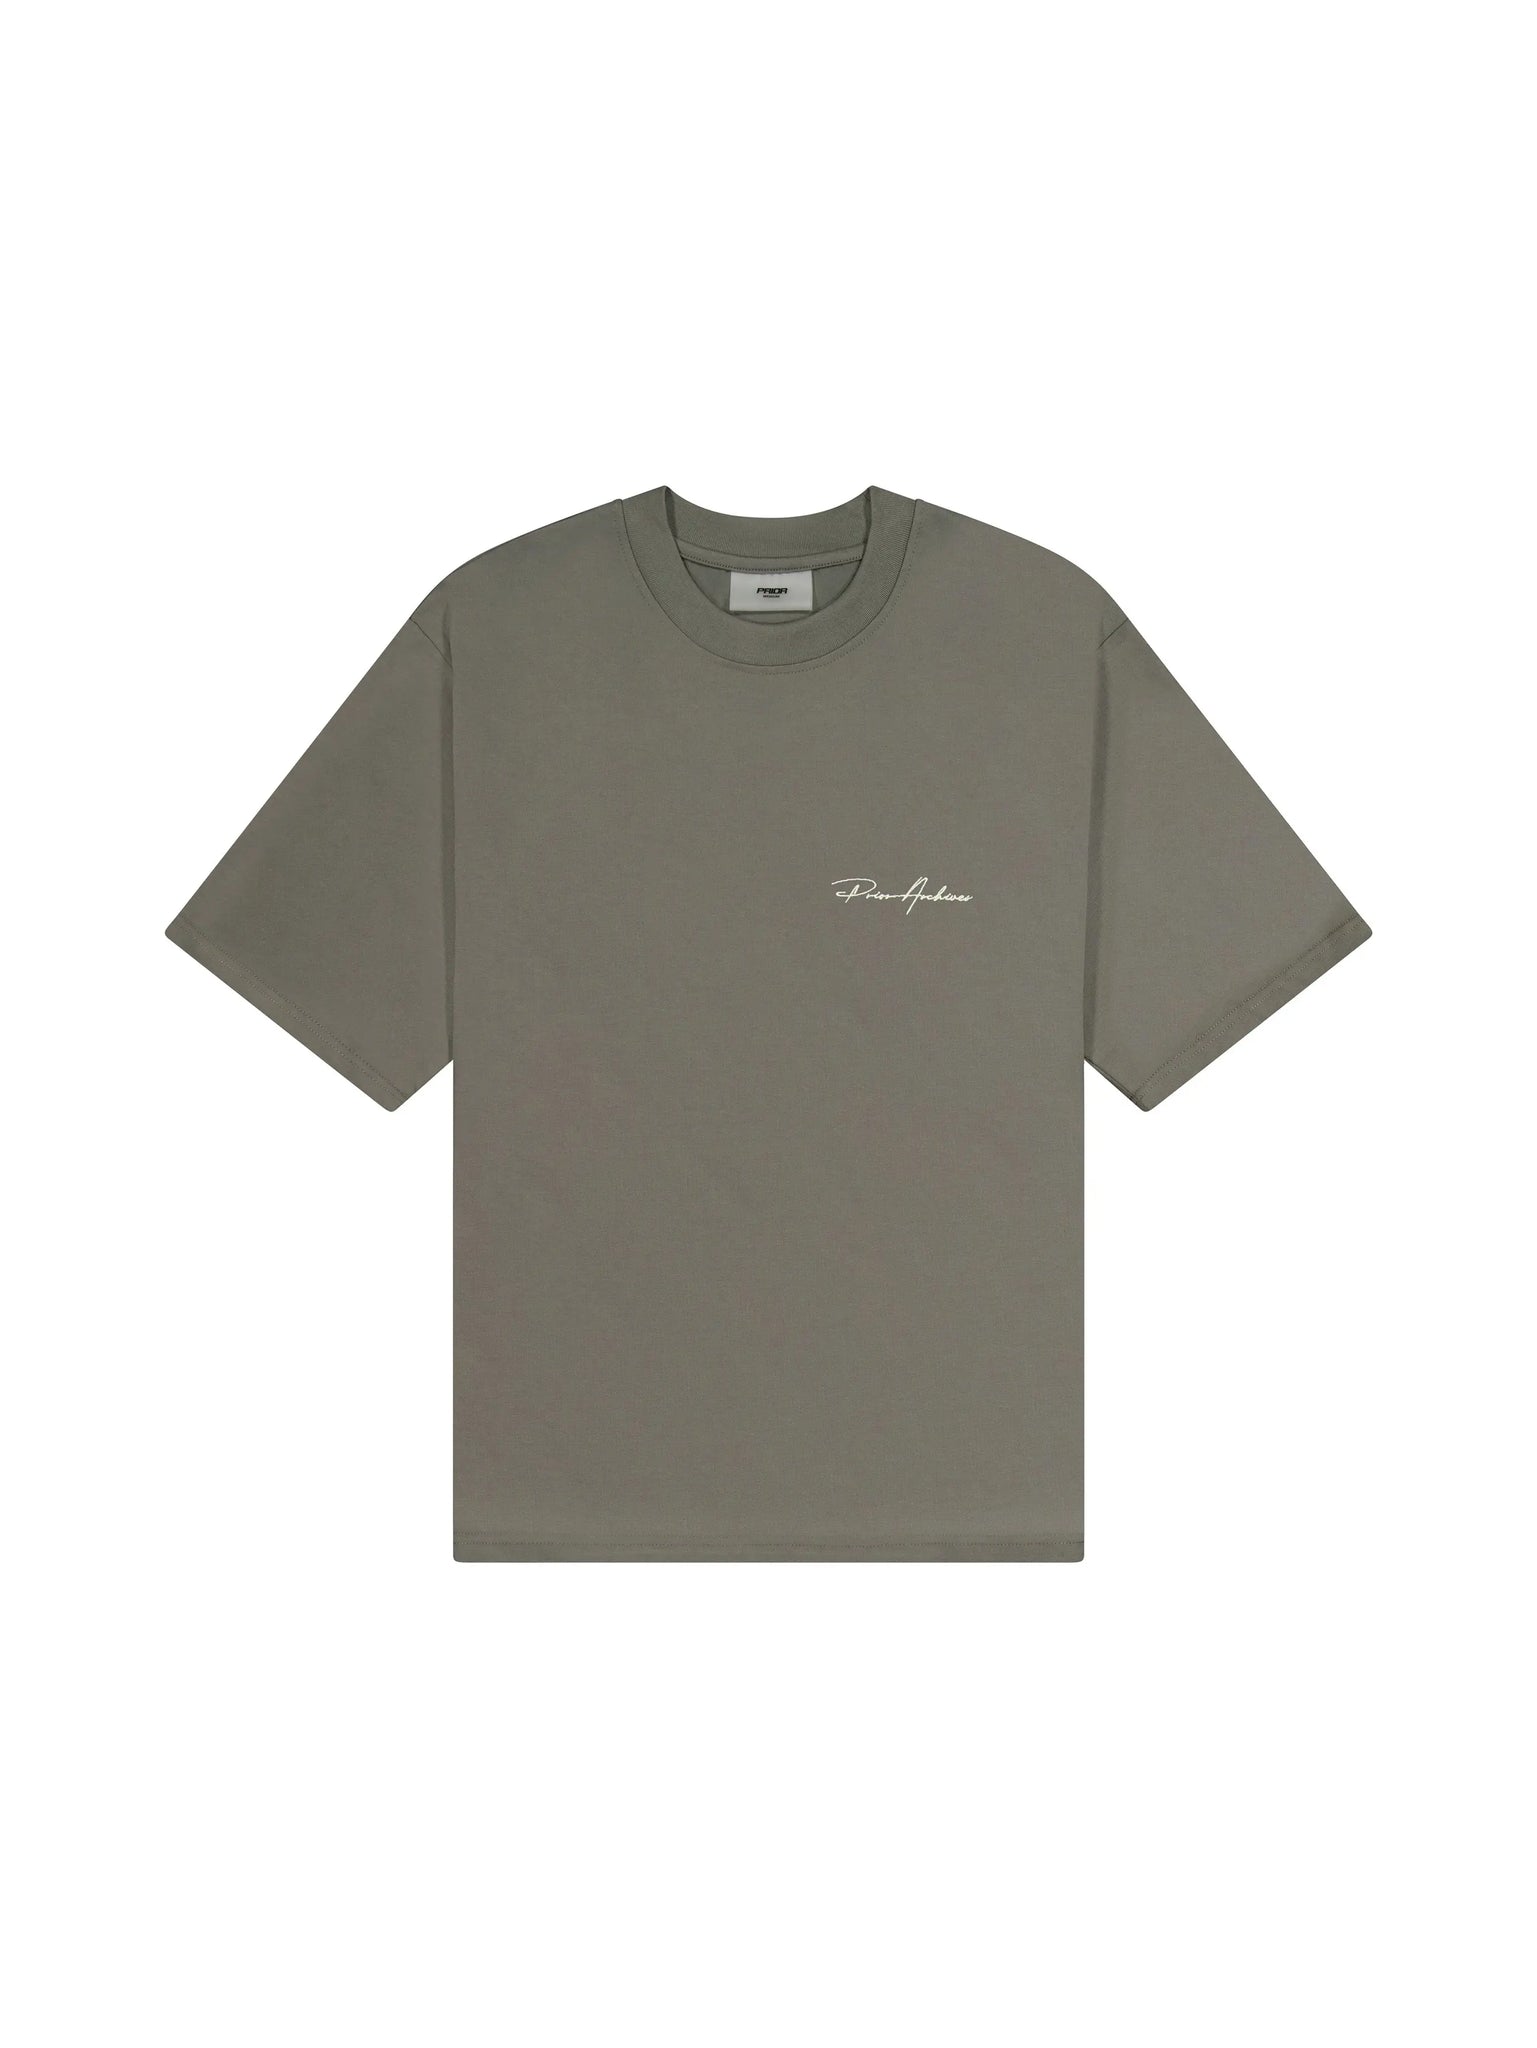 Prior Embroidery Logo Oversized T-shirt Medium Olive in Auckland, New Zealand - Shop name